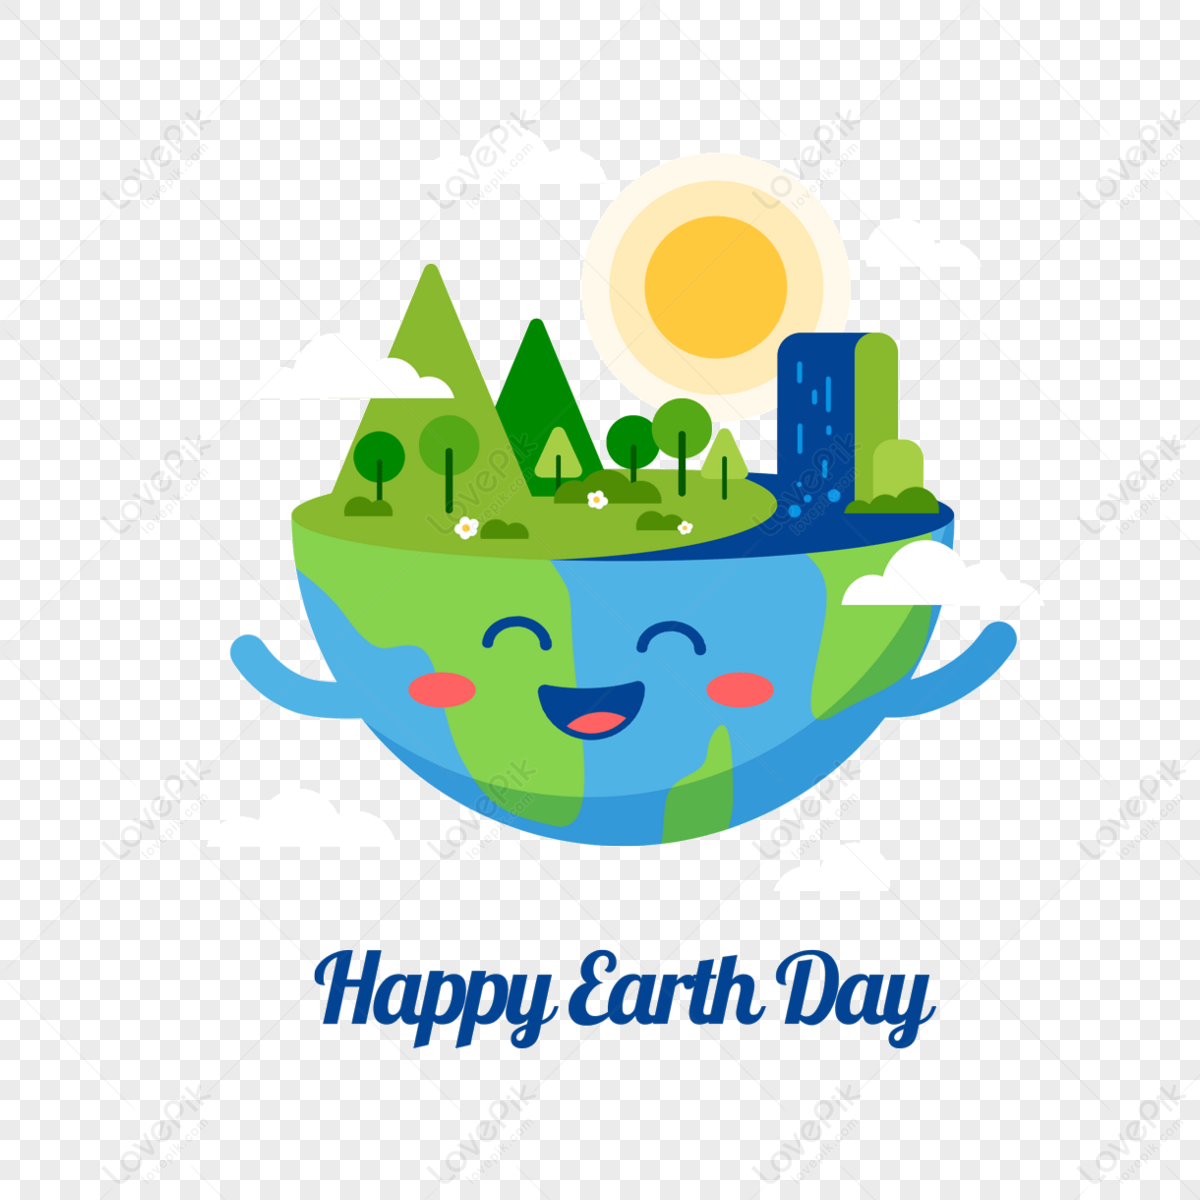 earth day logo png download - 3480*3480 - Free Transparent Green Planet  Earth png Download. - CleanPNG / KissPNG